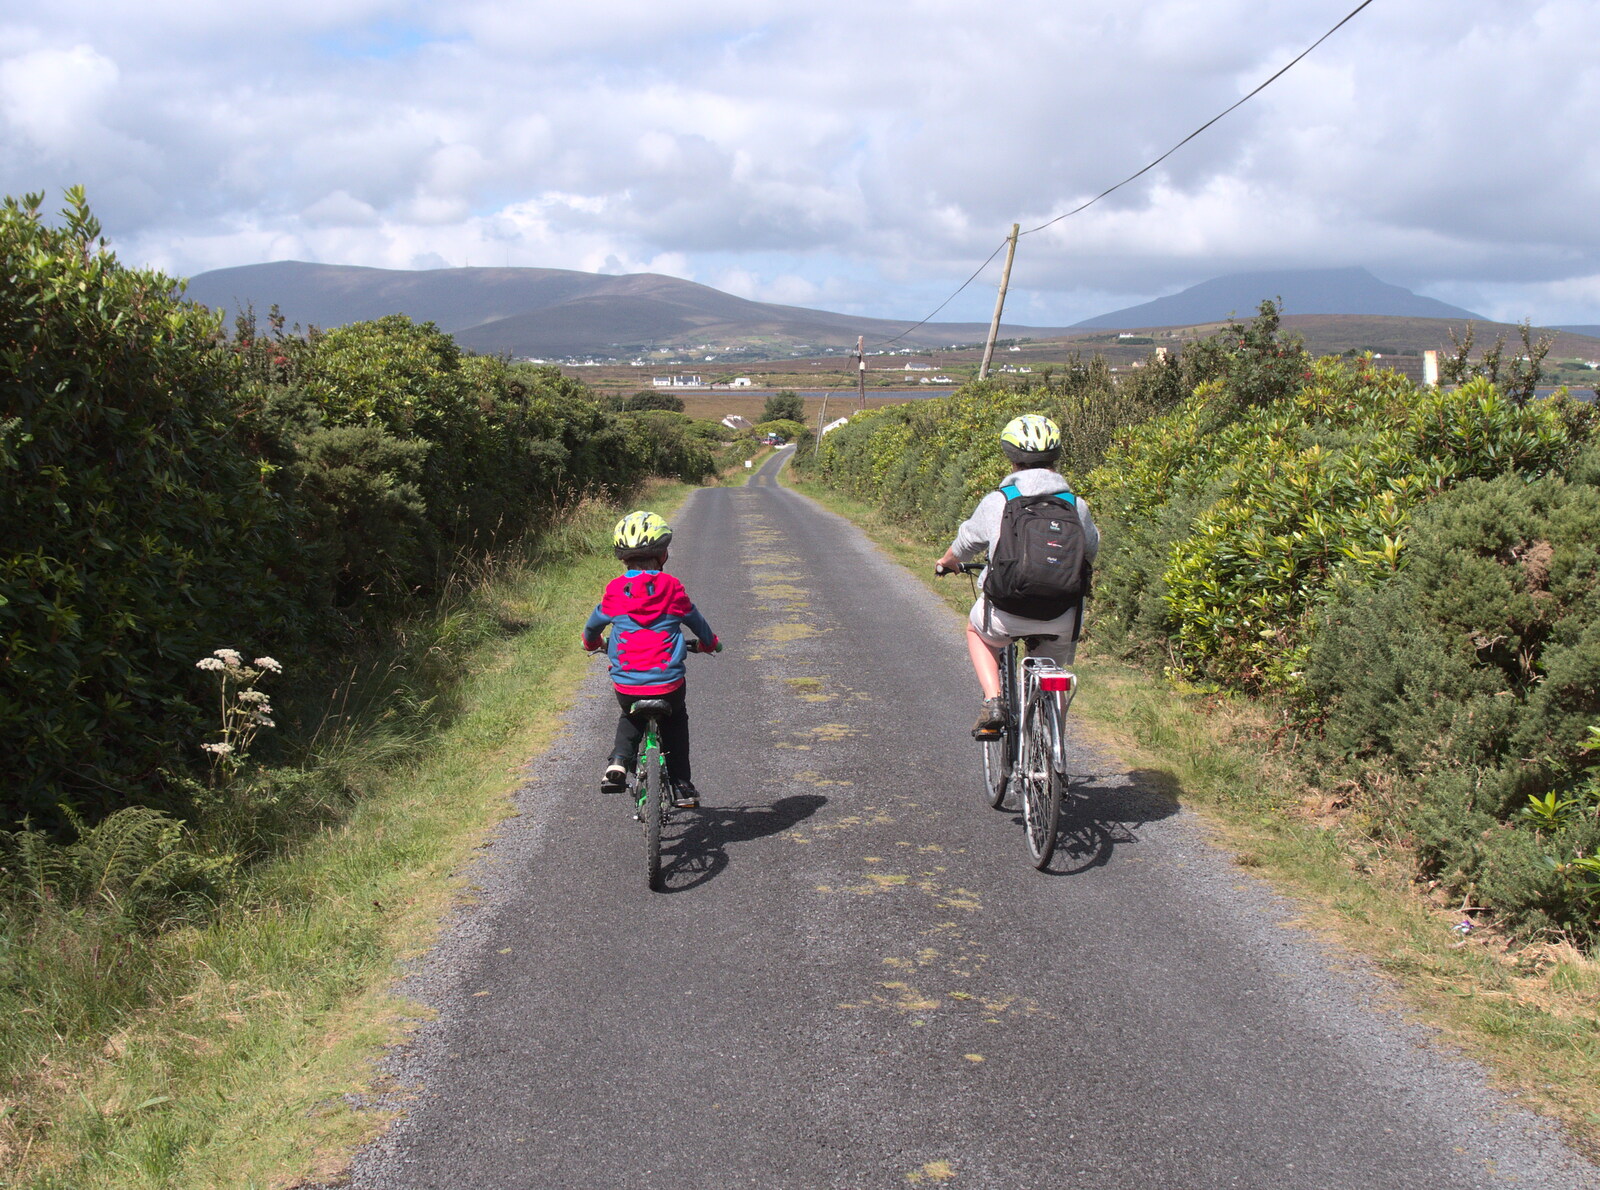 We set off down the Greenway from A Bike Ride to Mulranny, County Mayo, Ireland - 9th August 2017